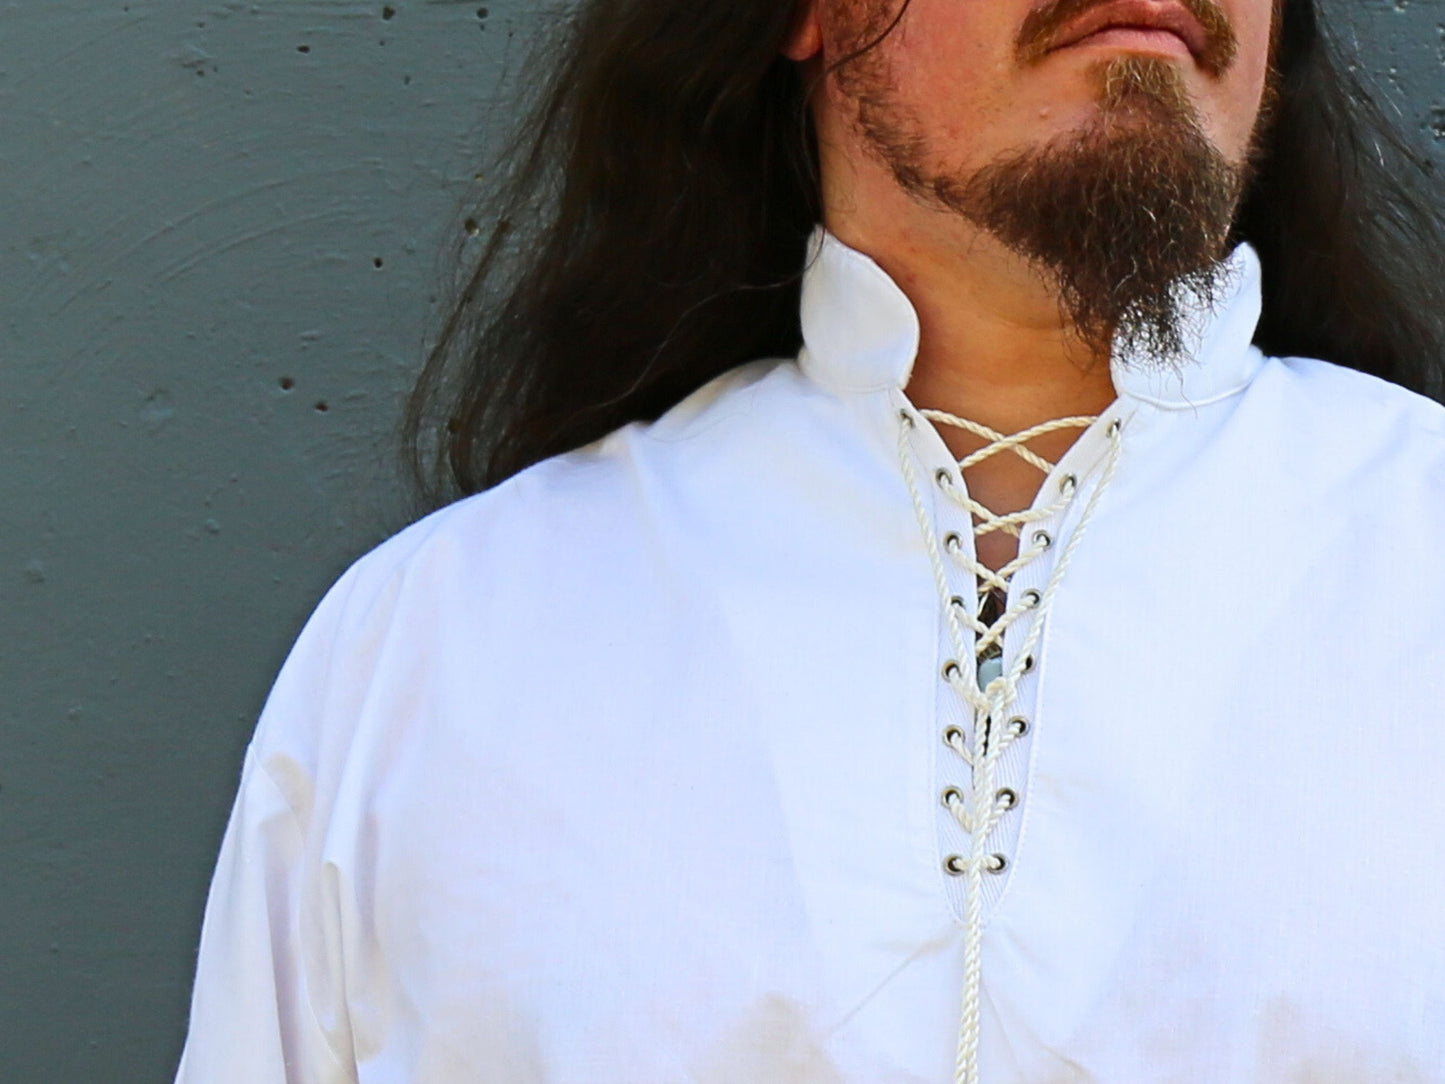 The VM Lace-Up Poet Shirt